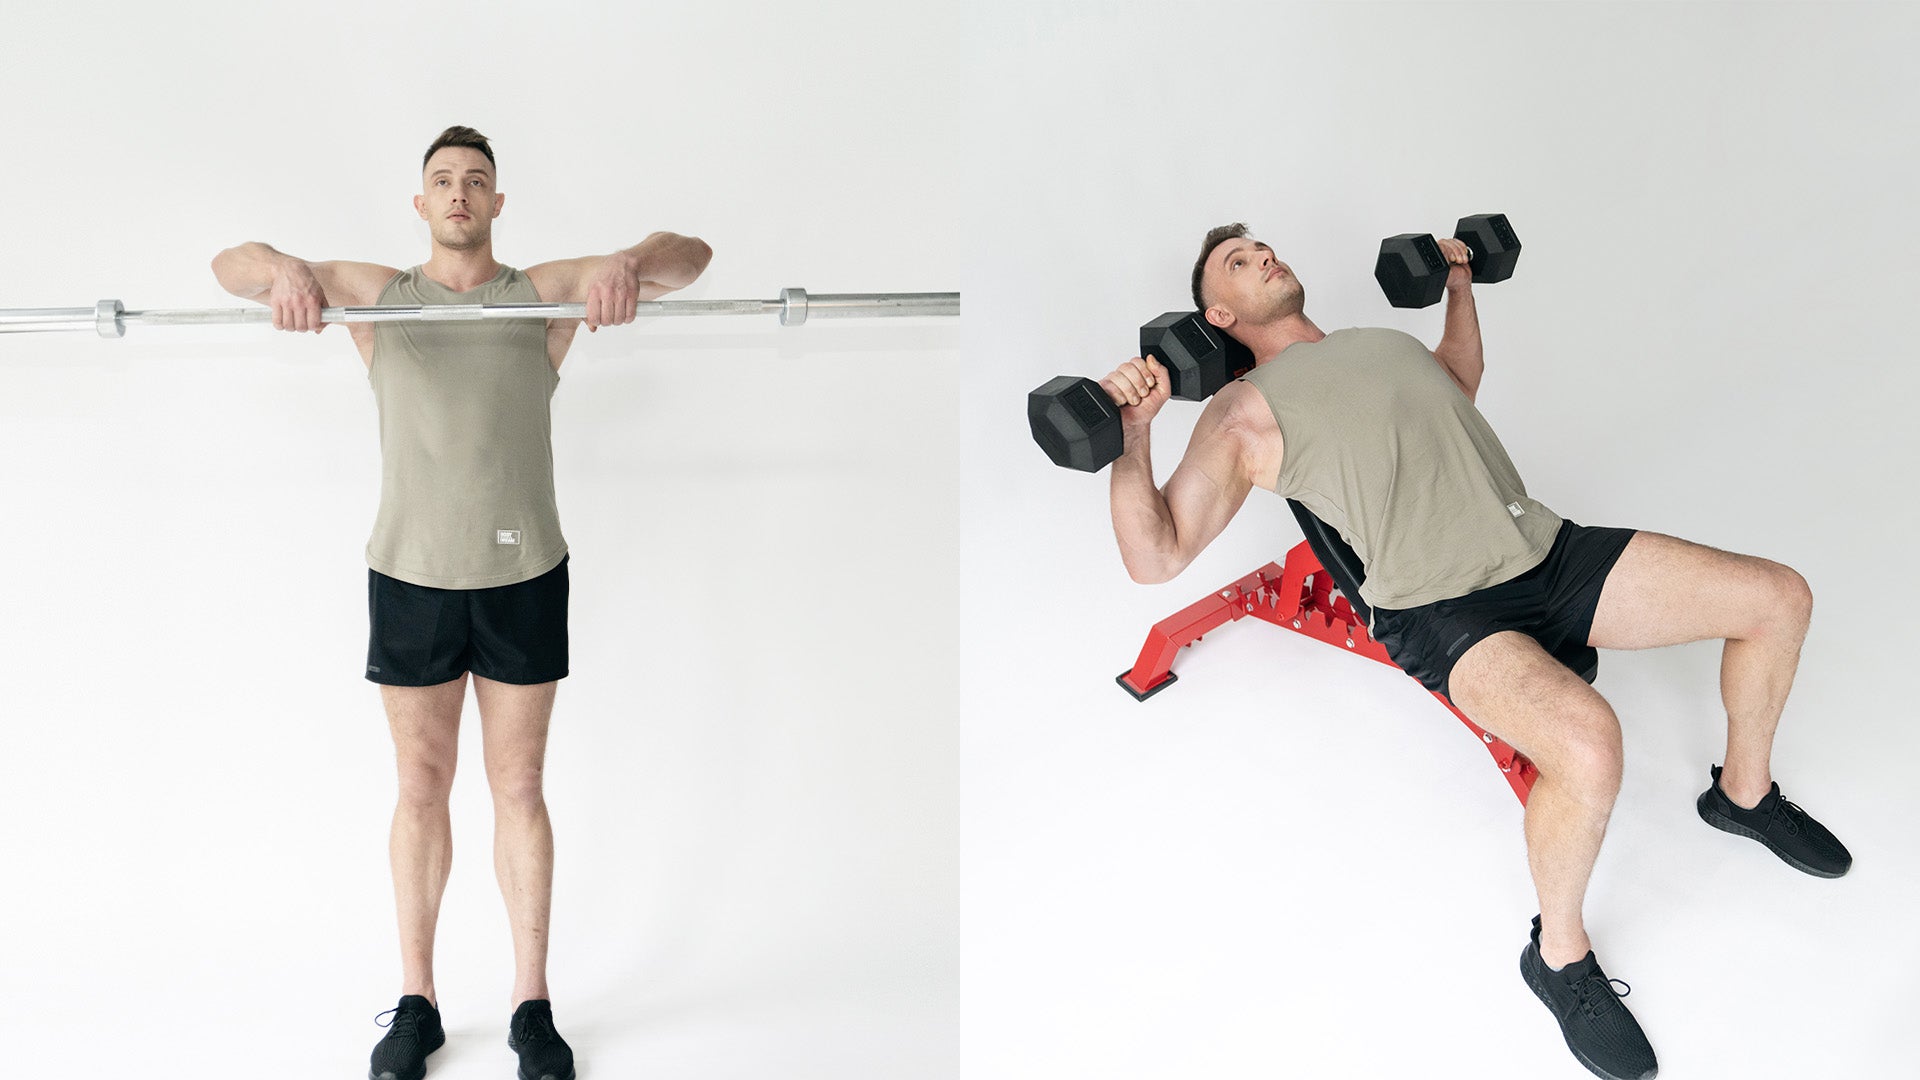 Side-by-side images of a man performing an upright row with a barbell and a dumbbell bench press